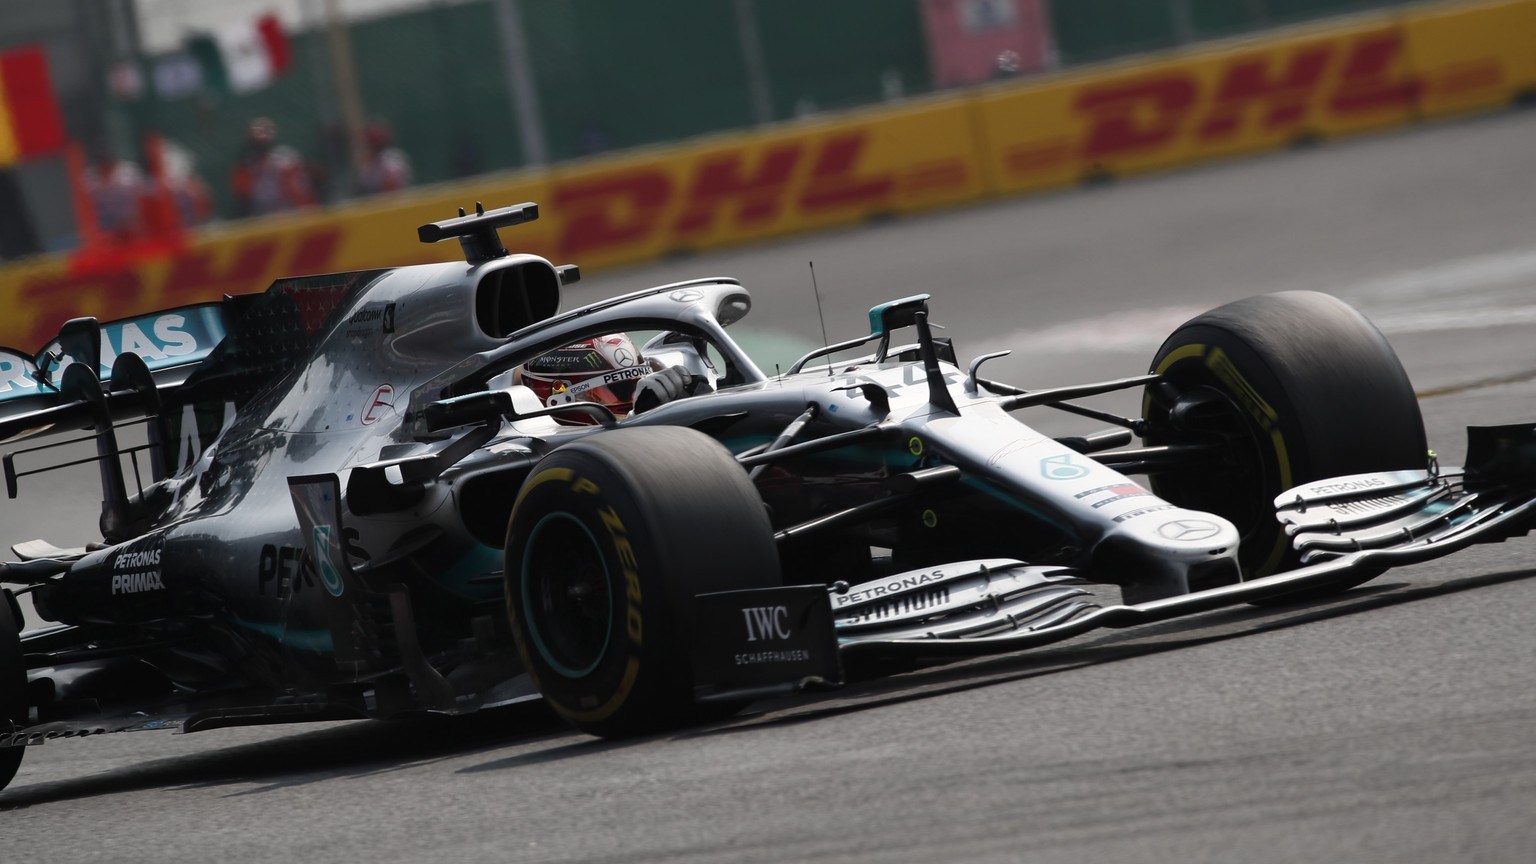 epa07954793 British Lewis Hamilton of Mercedes competes during the Mexican Grand Prix at the Hermanos Rodriguez Racetrack in Mexico City, Mexico, 27 October 2019. EPA/JOSE MENDEZ